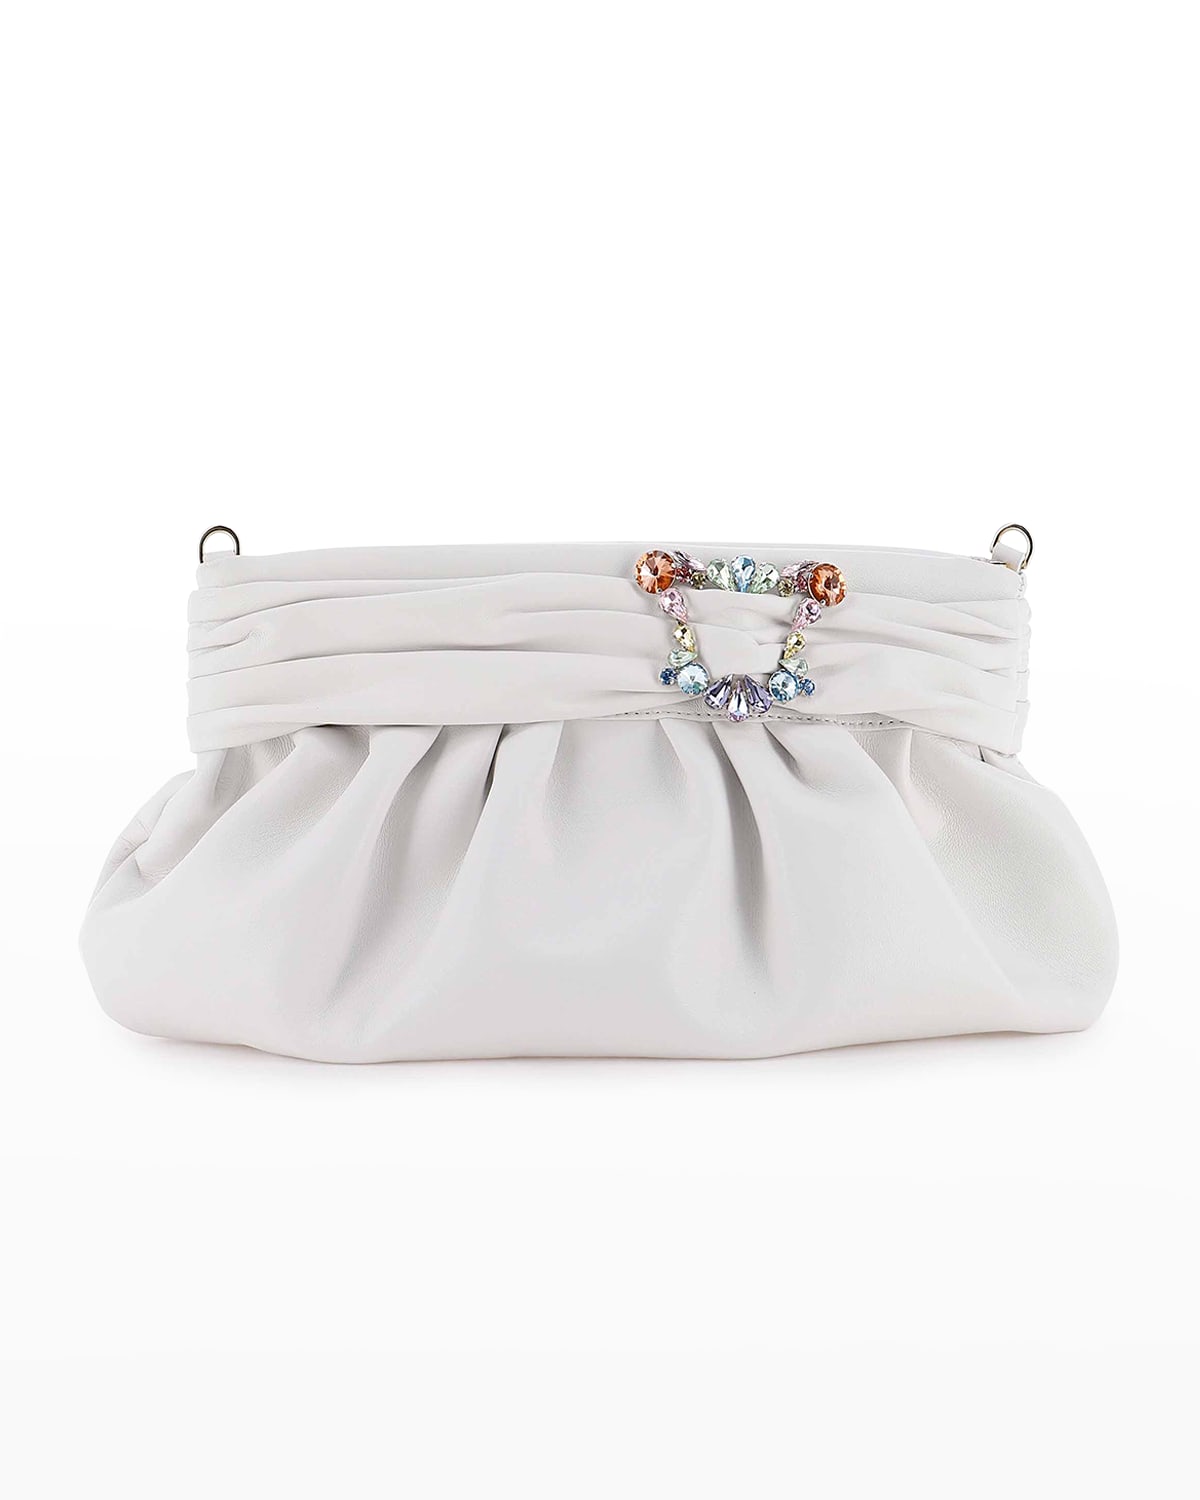 Sophia Webster Margaux Ruched Leather Clutch Bag In White